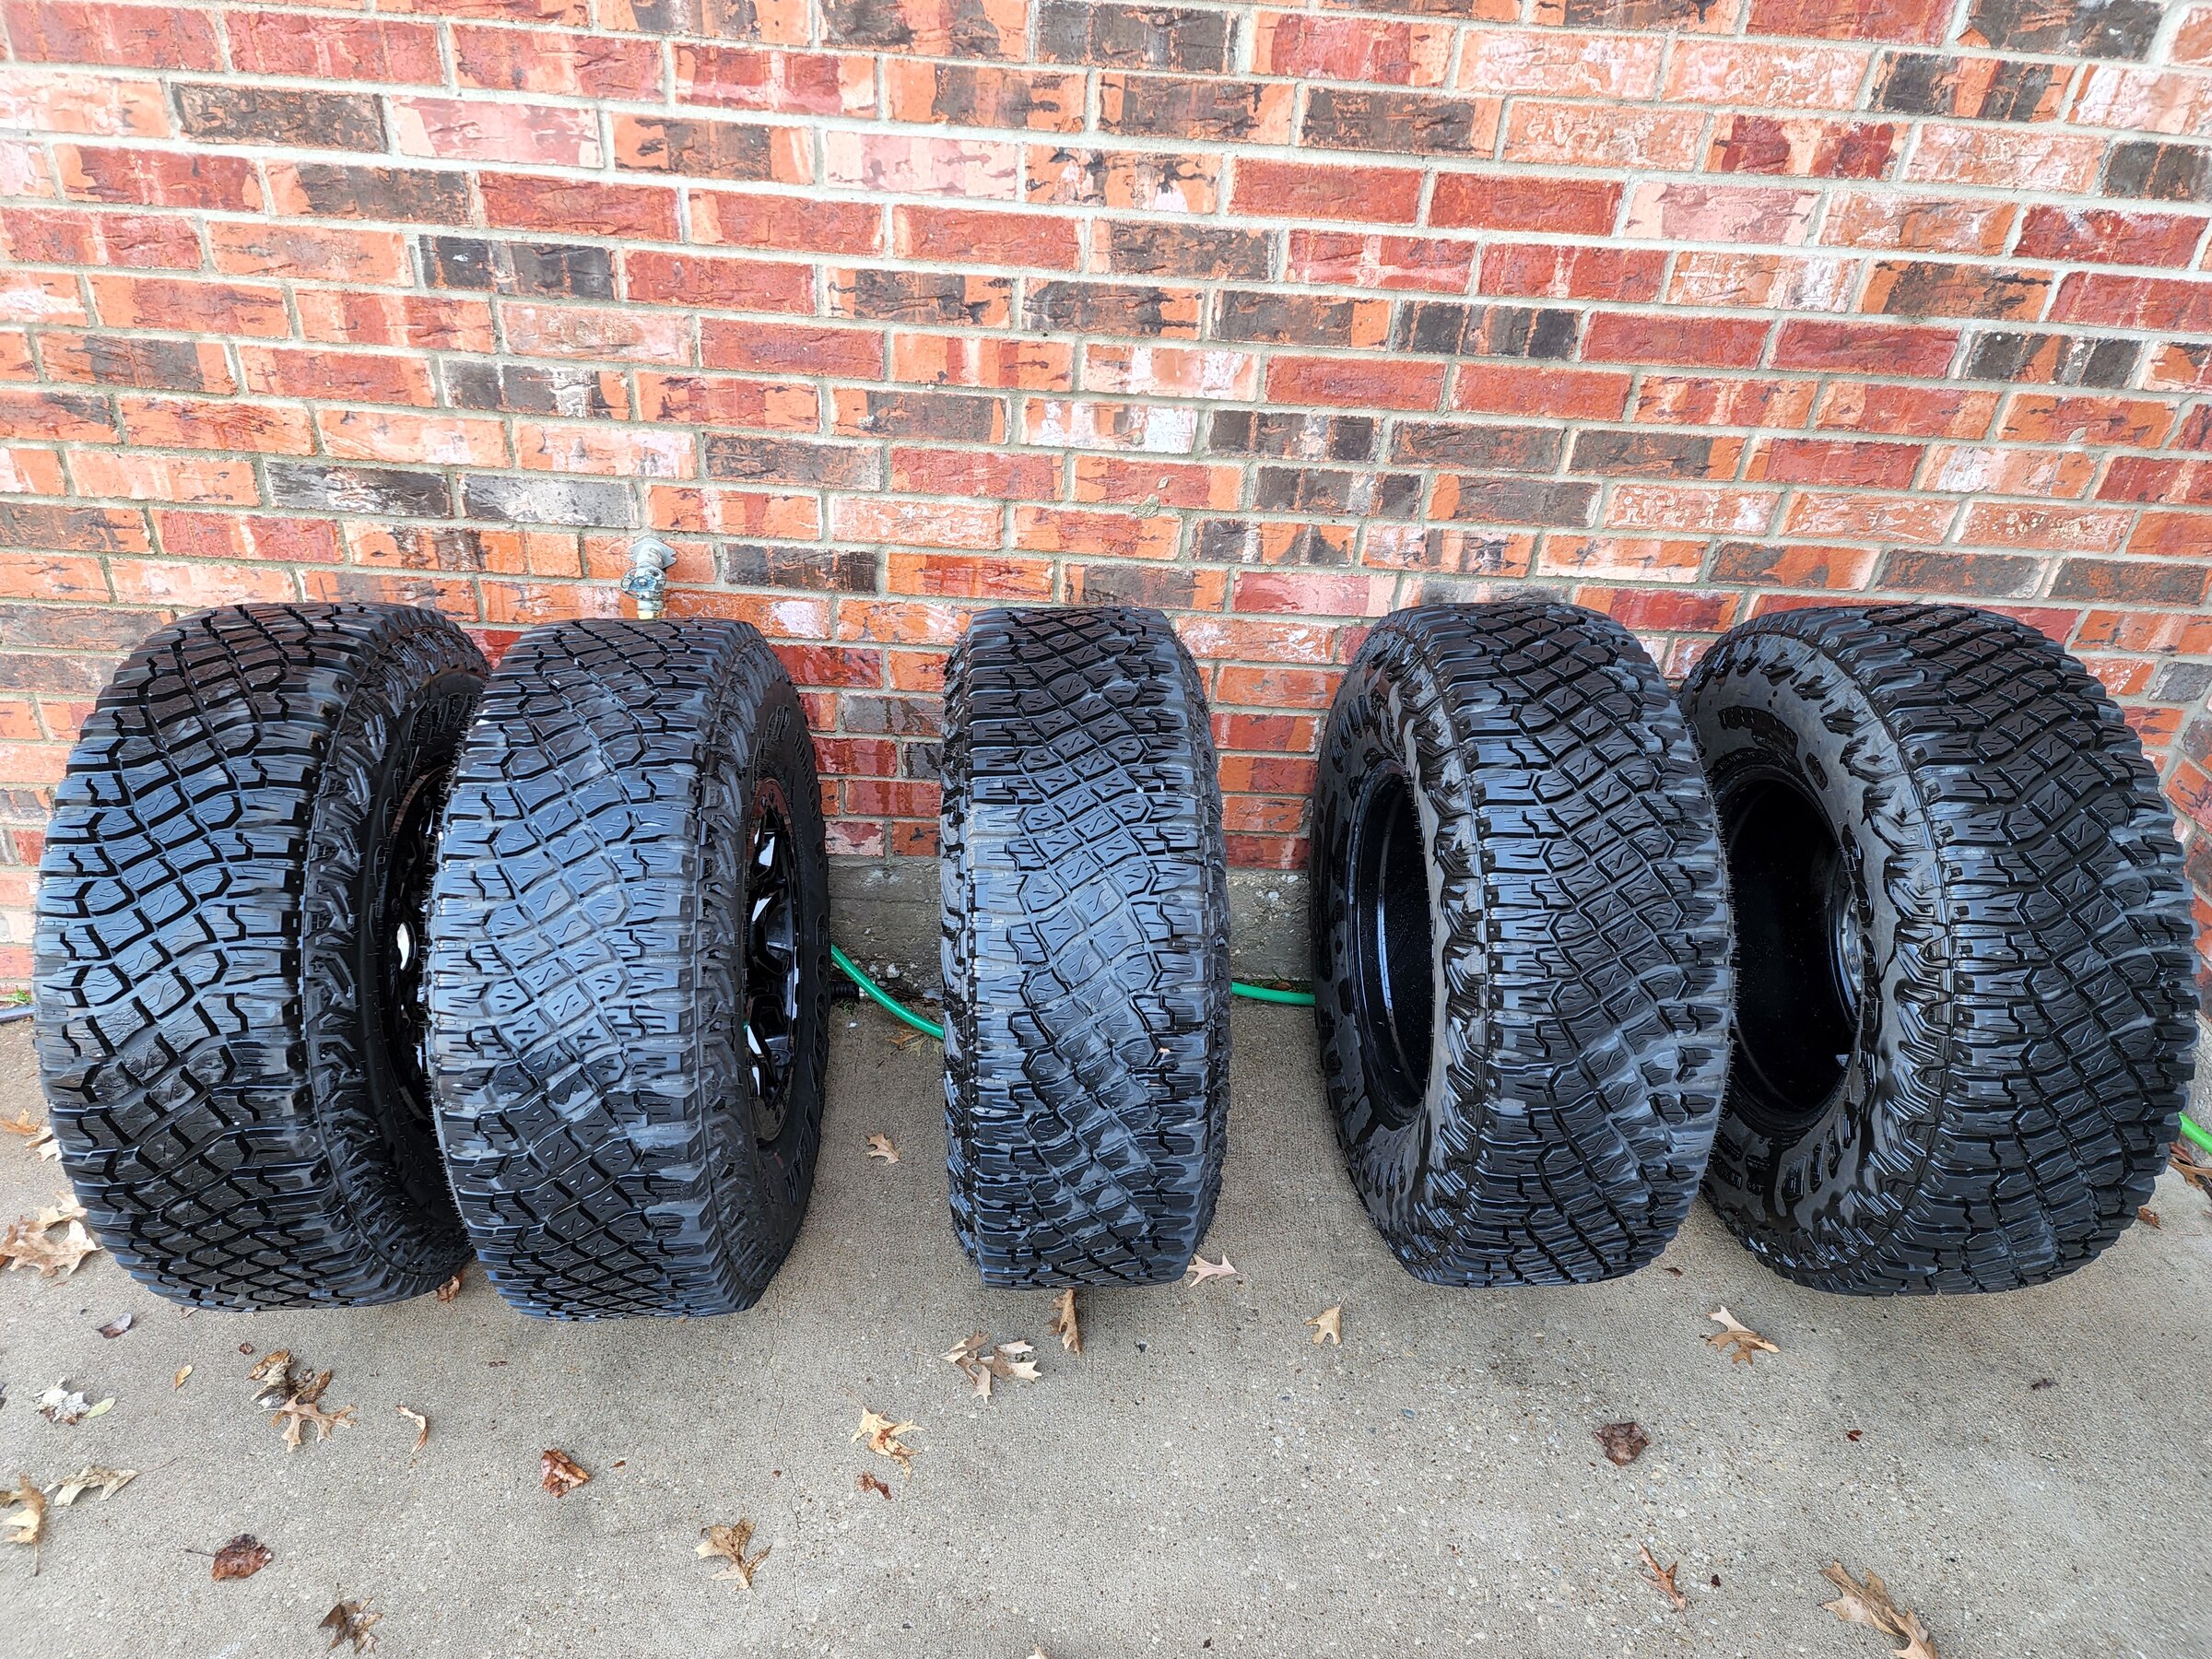 Ford Bronco 5 Black Beadlock Capable Wheels with GoodYear Territory M/T's $old- Dallas 20220305_172349